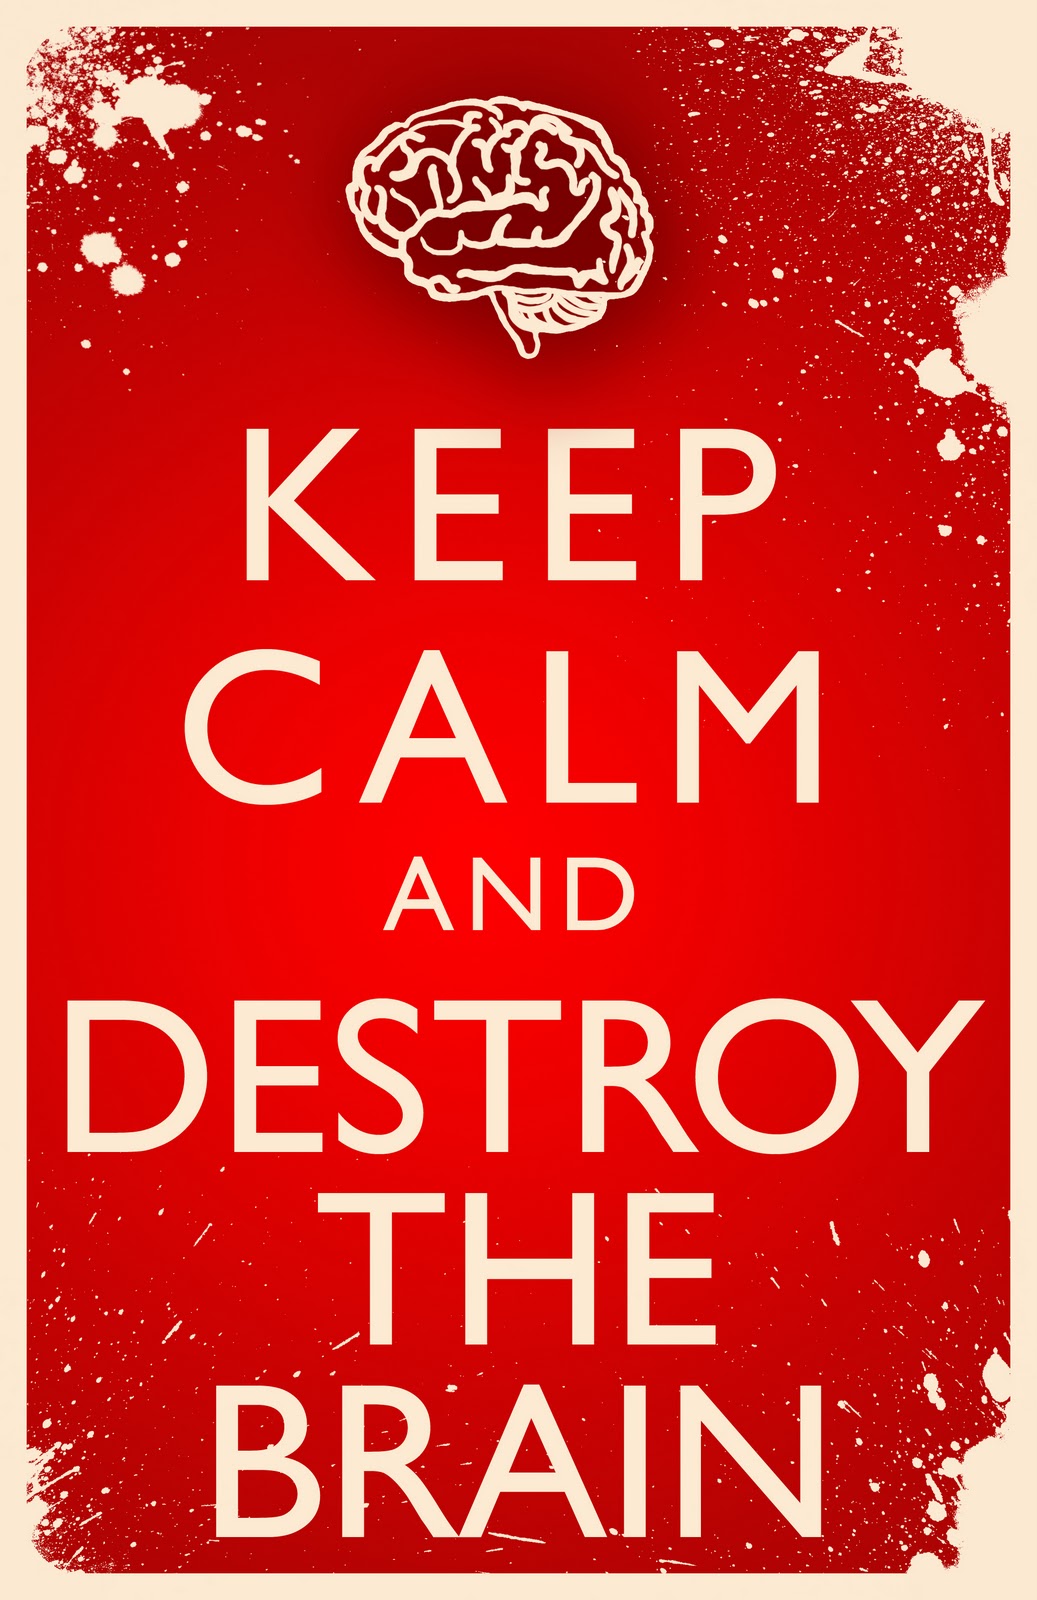 Keep Calm And Destroy The Brain HD Wallpaper